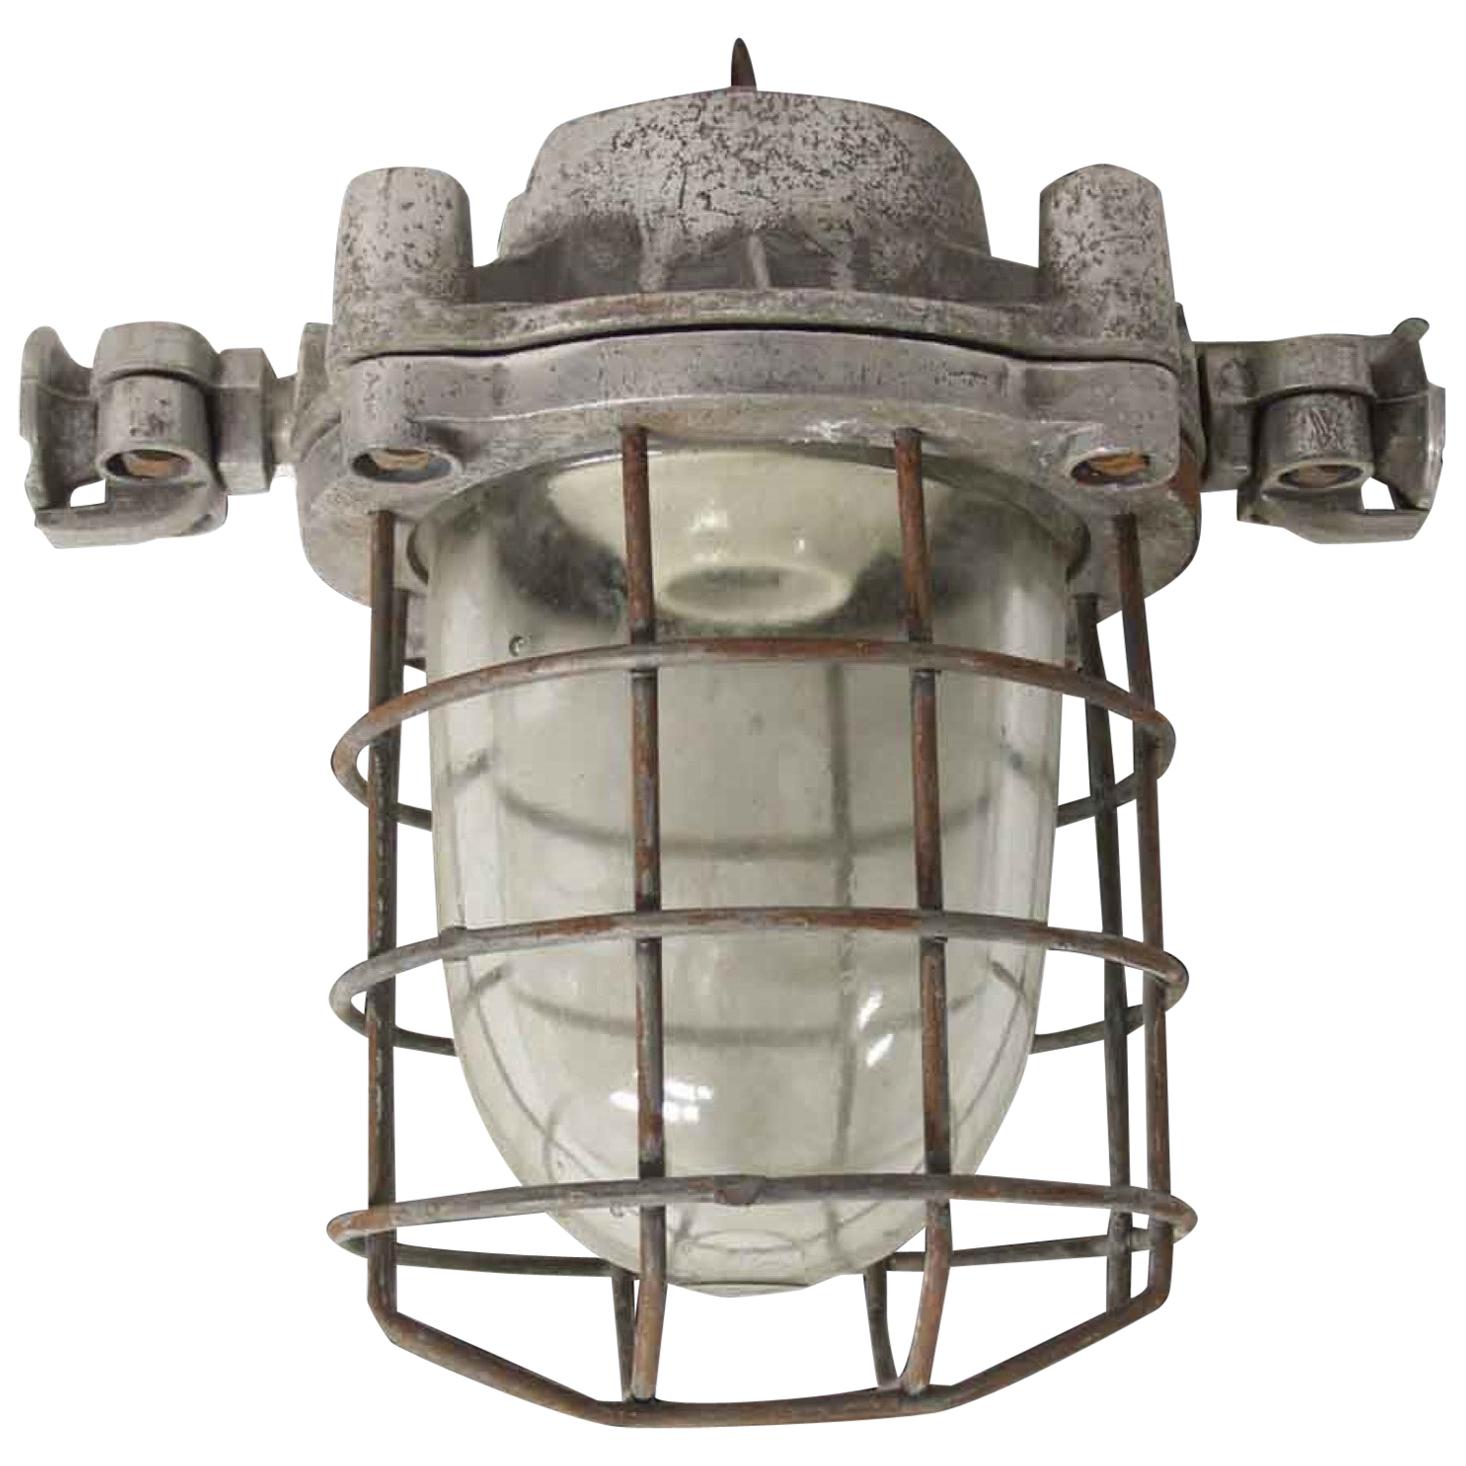 WALL MOUNT SCONCE LIGHT FIXTURE SHIP NAUTICAL VINTAGE STYLE MADE OF ALUMINUM 